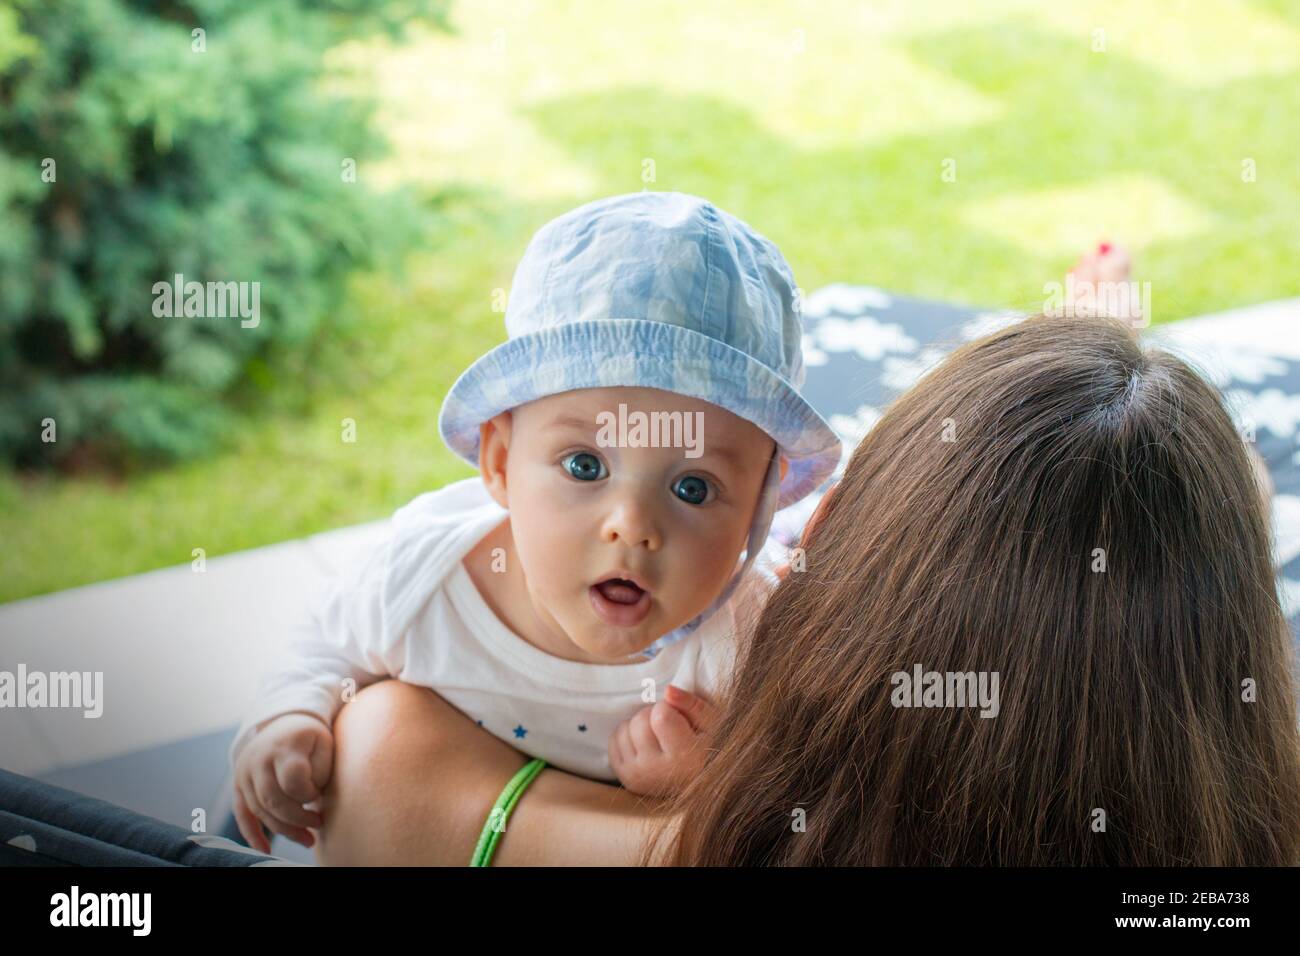 Surprised baby face with fascinated expression, little cute child in mother's arms looks out with open mouth and focused wide open blue eyes Stock Photo